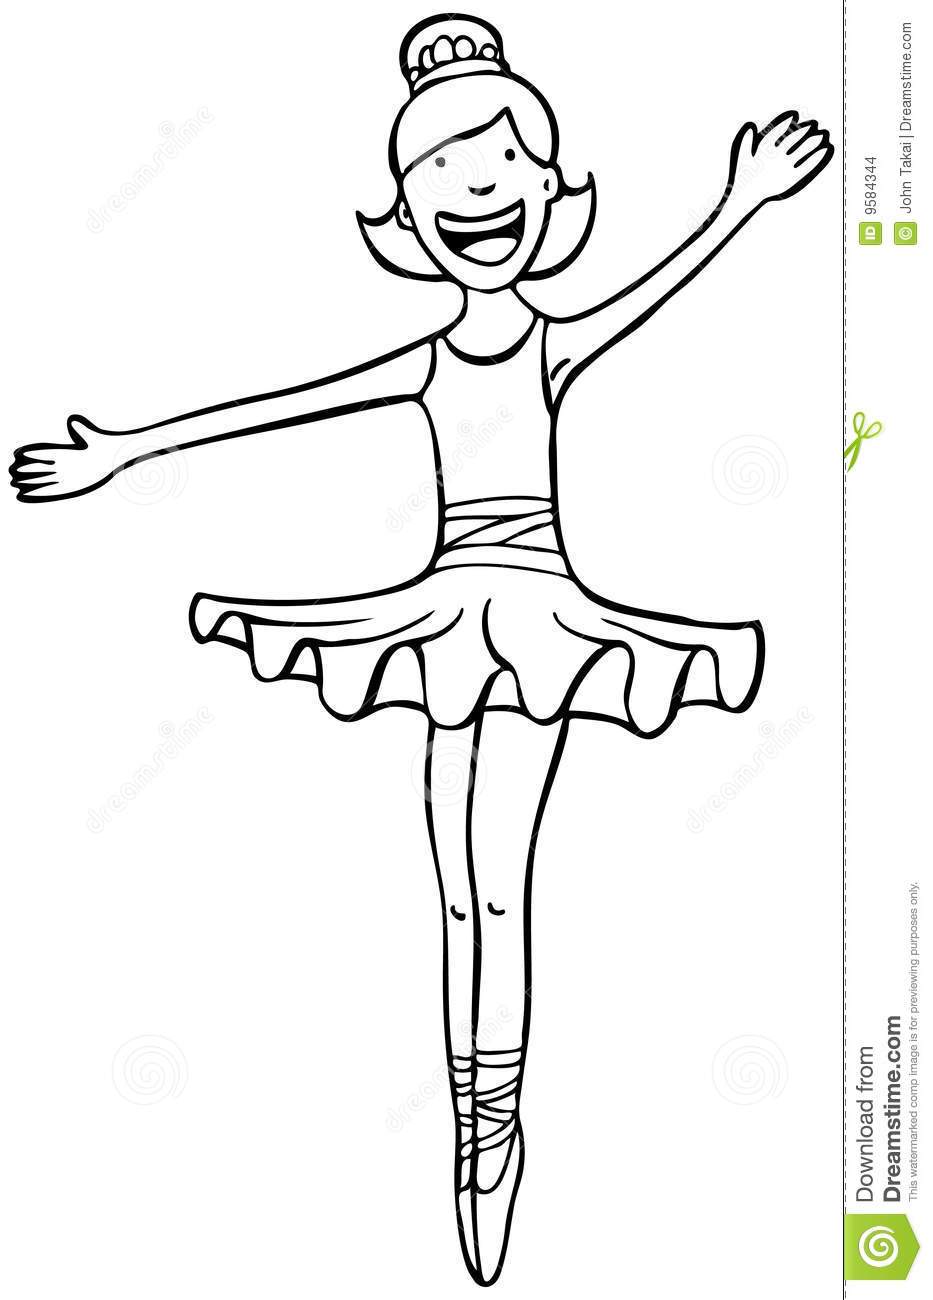 Girl dancing clipart black and white 3 » Clipart Portal.